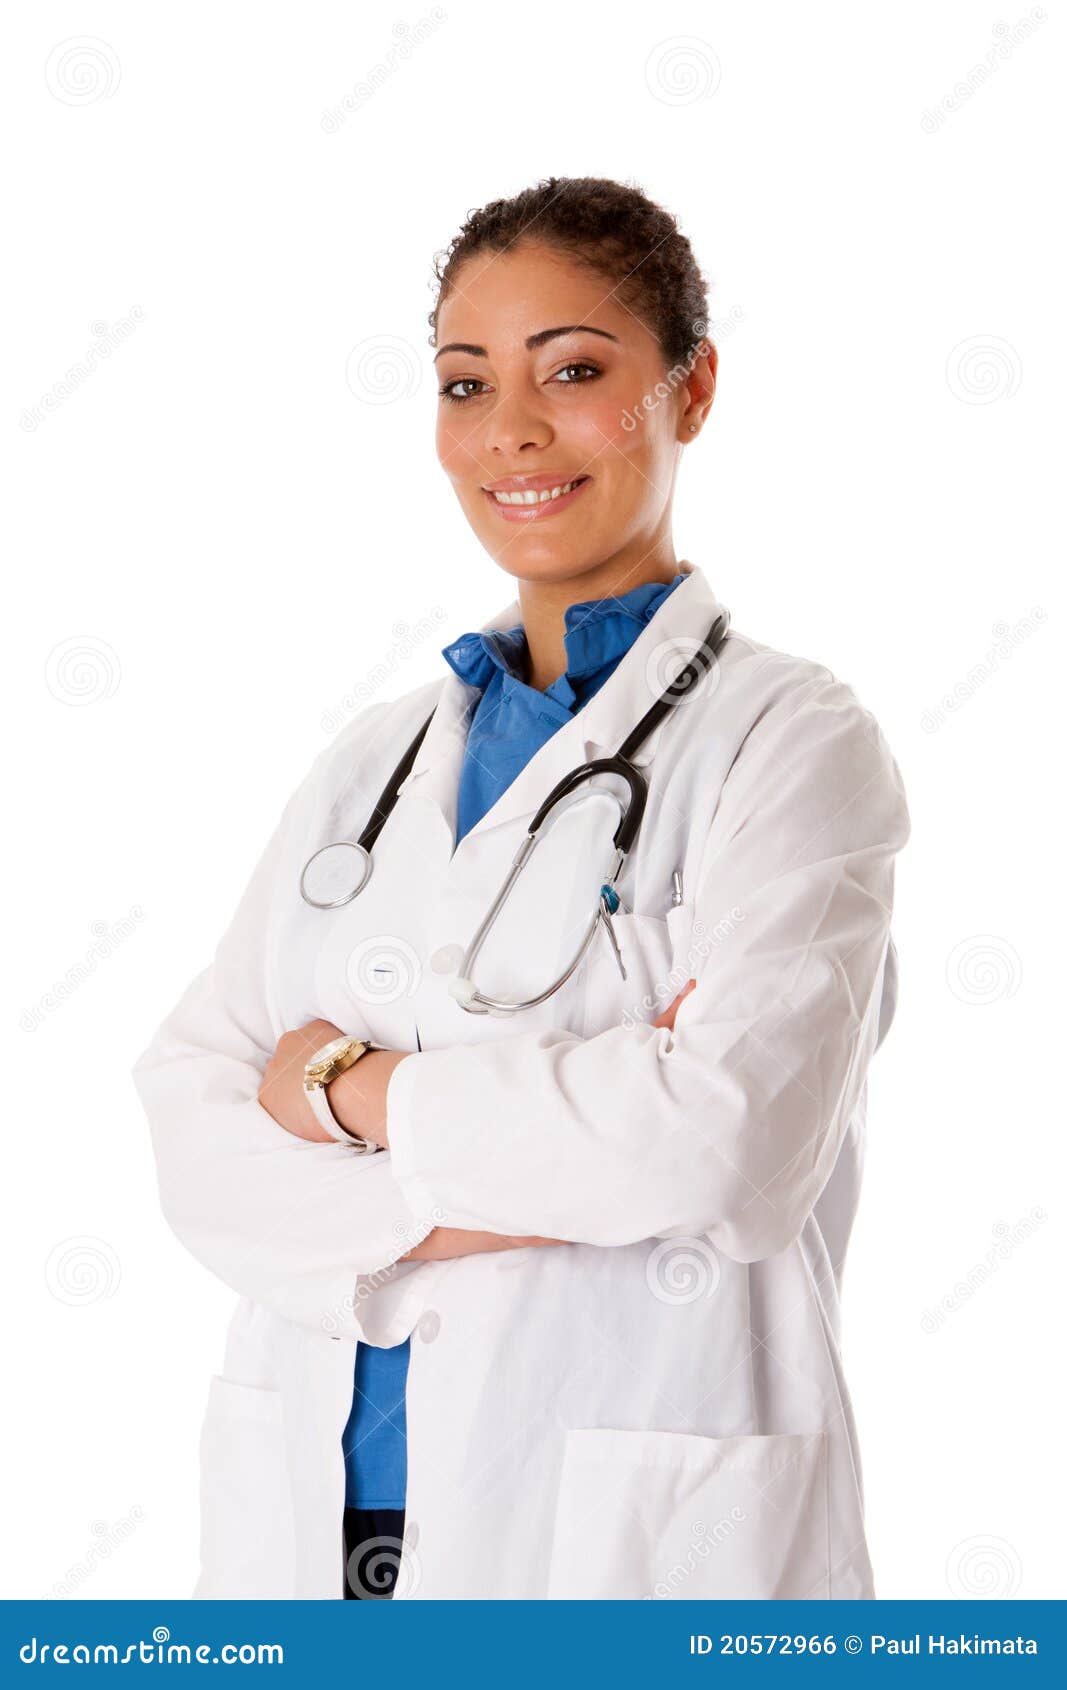 happy smiling doctor physician